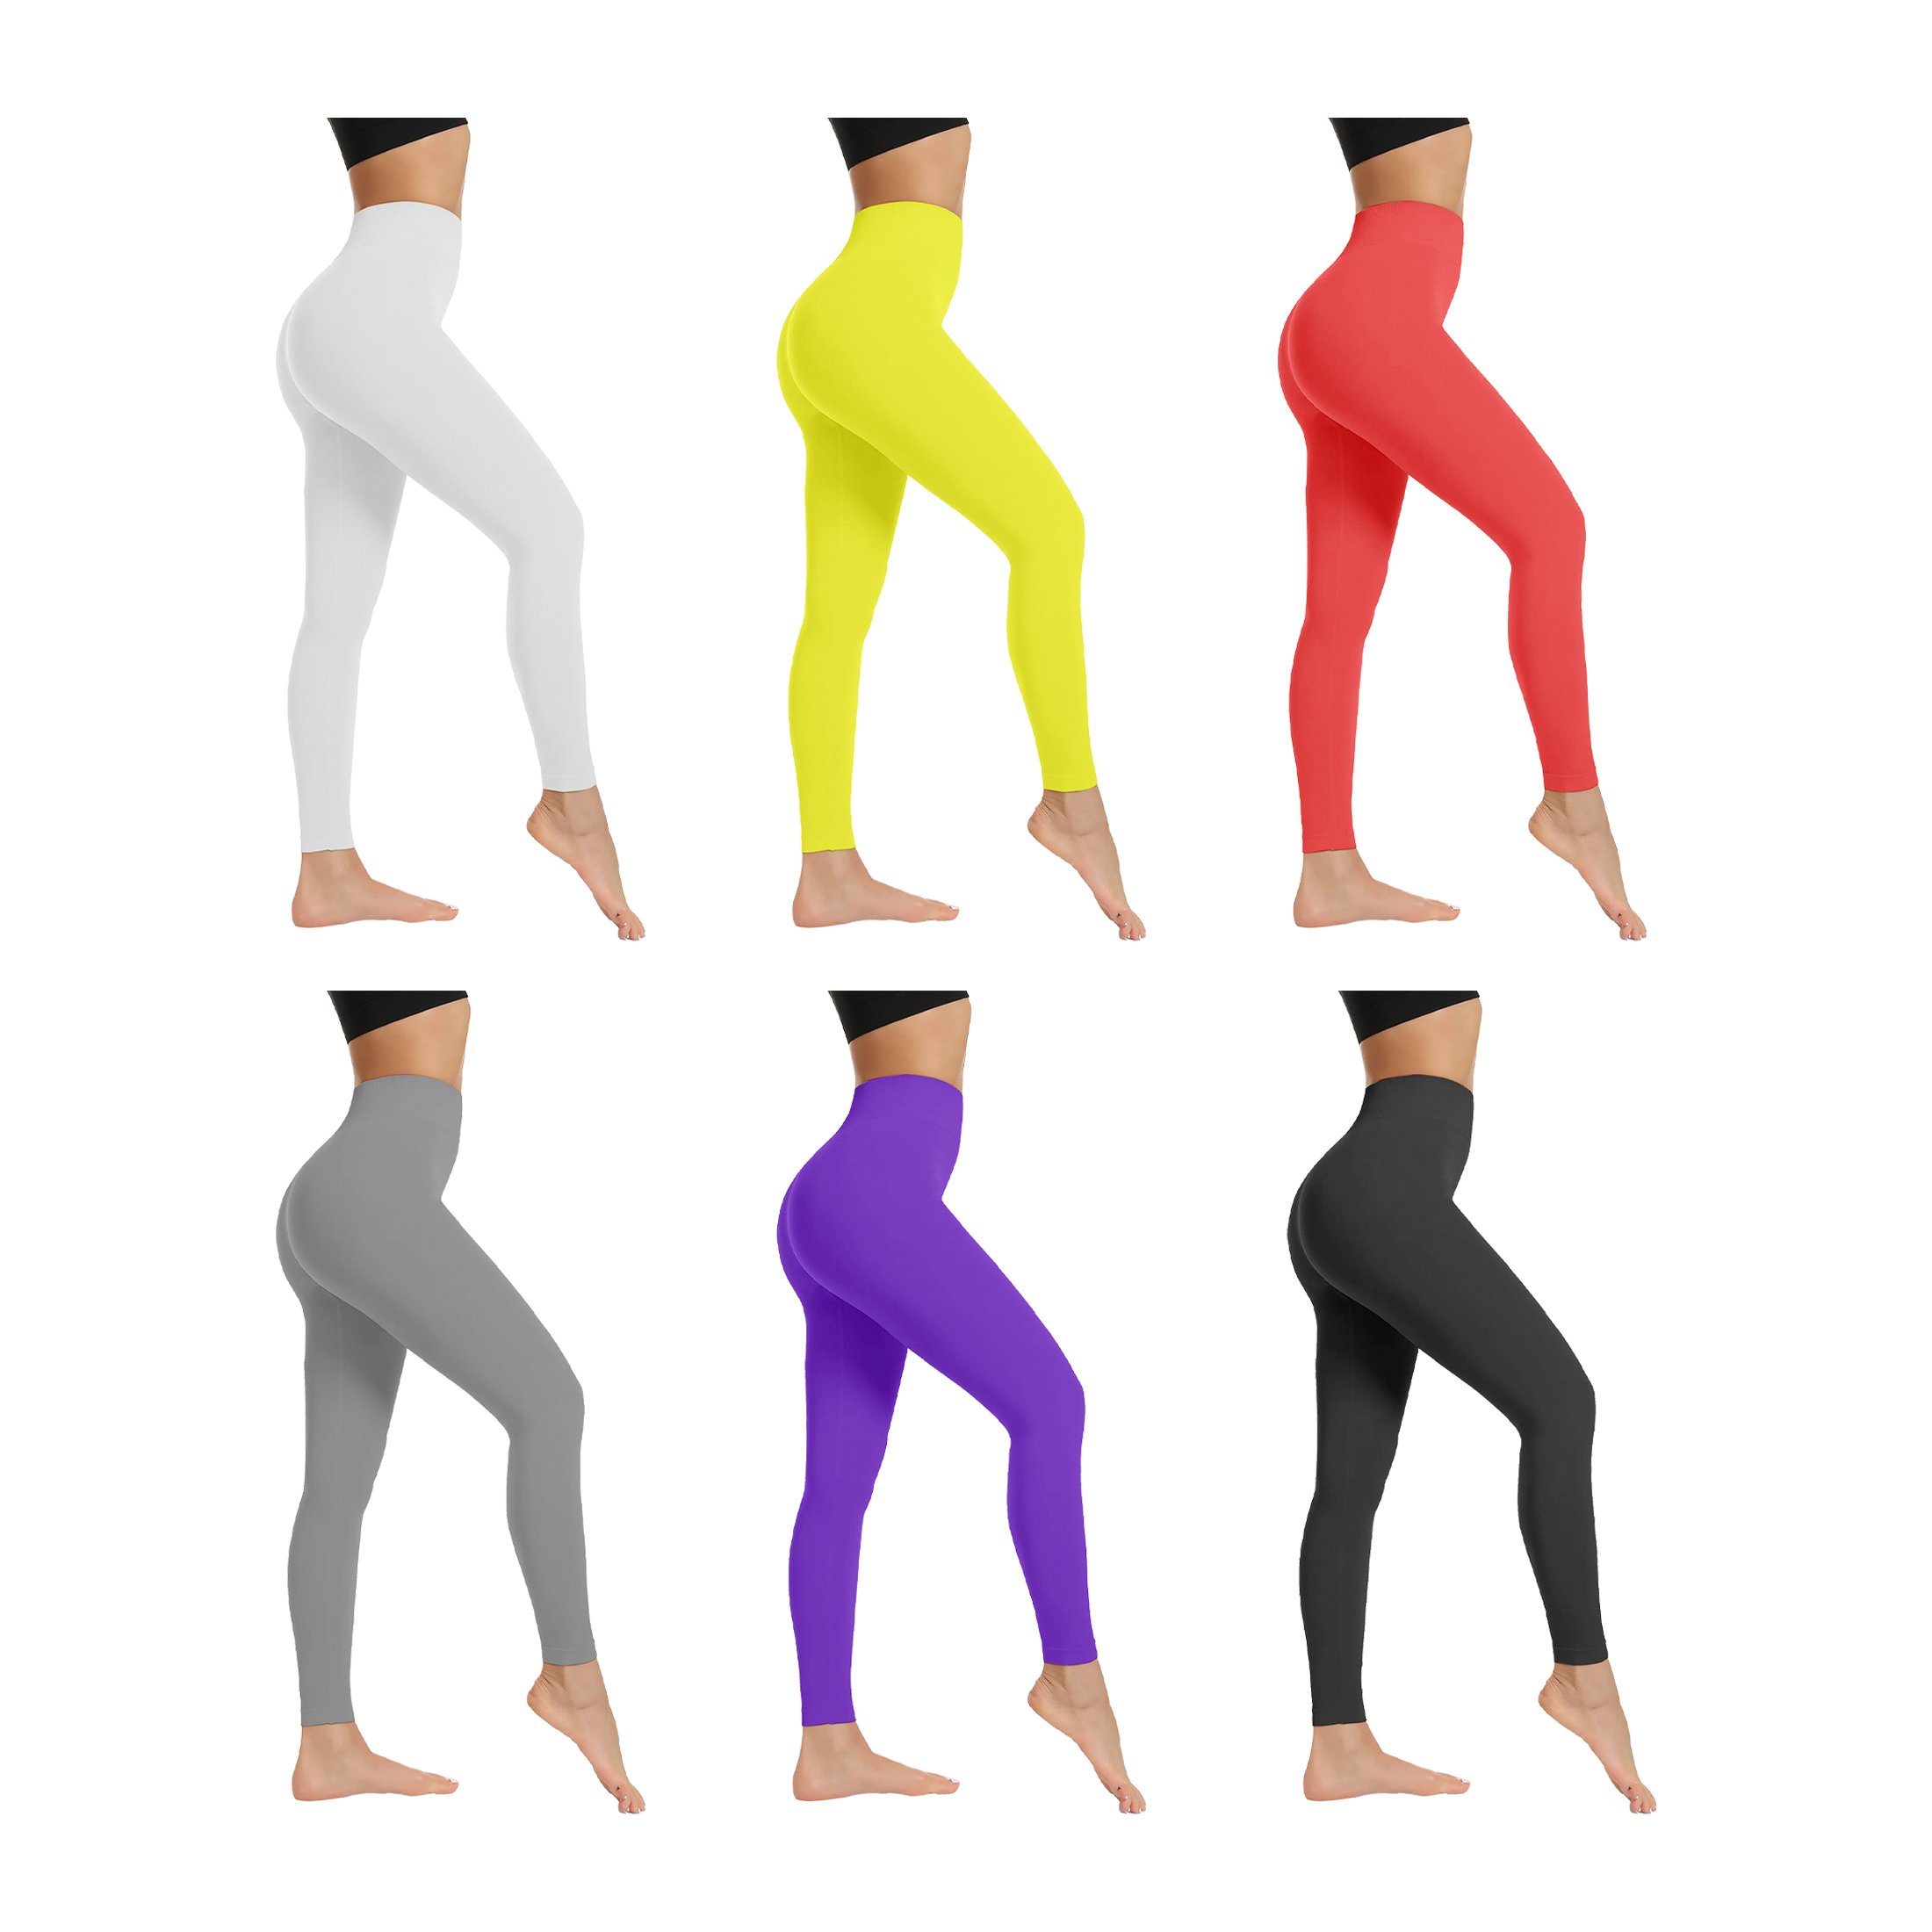 1-Pack: Women's High-Waist Ultra-Soft Stretchy Solid Fitness Yoga Leggings Pants - XL